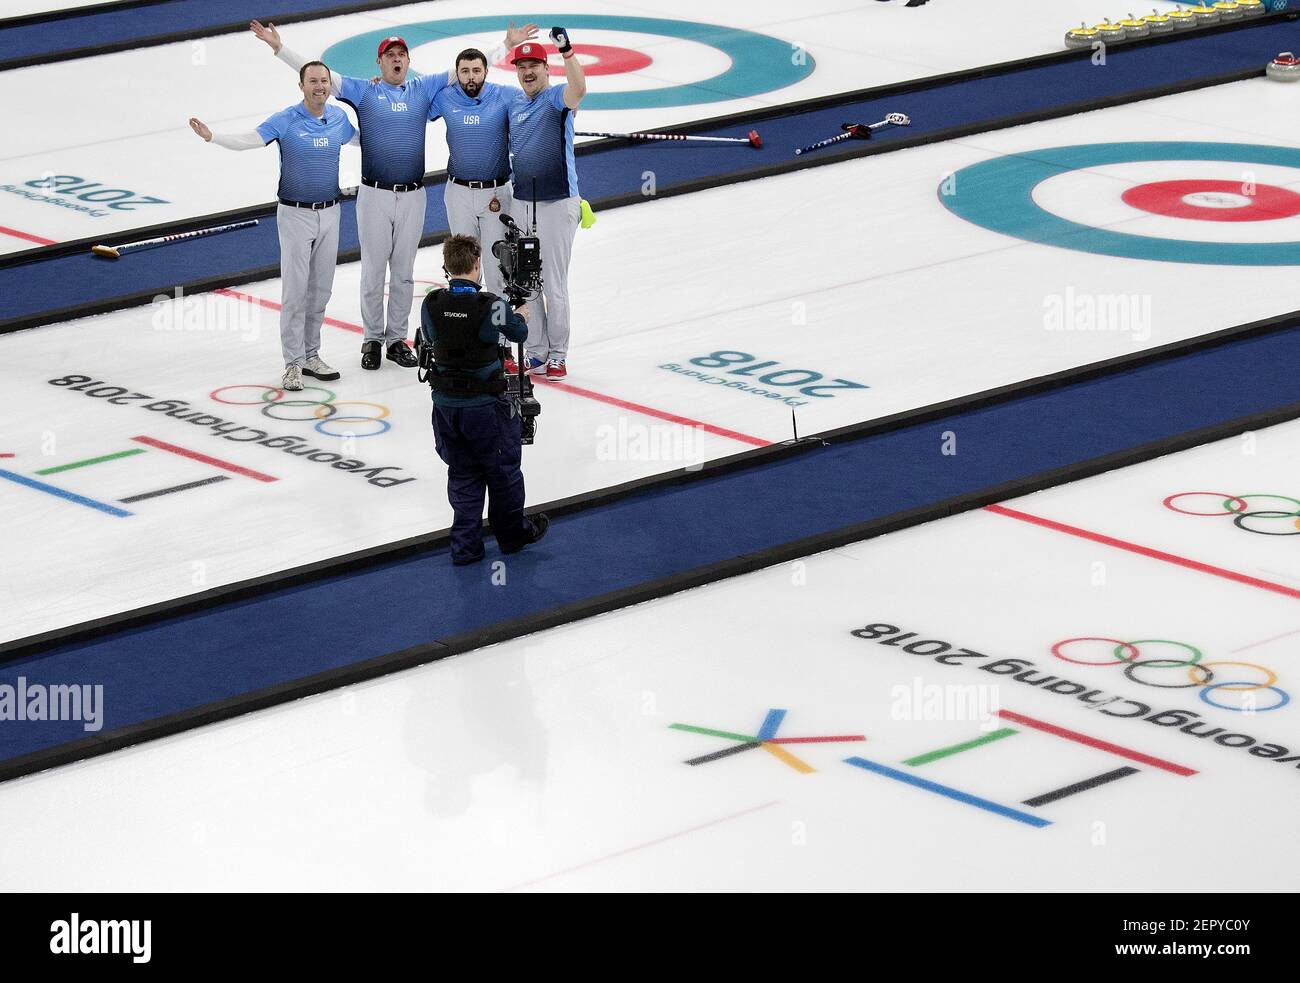 Team USA celebrates after a 10-7 win against Sweden during the gold-medal match on Saturday, Feb. 24, 2018, at the Pyeongchang Winter Olympics' Gangneung Curling Centre. (Photo by Carlos Gonzalez/Minneapolis Star Tribune/TNS/Sipa USA) Stock Photo